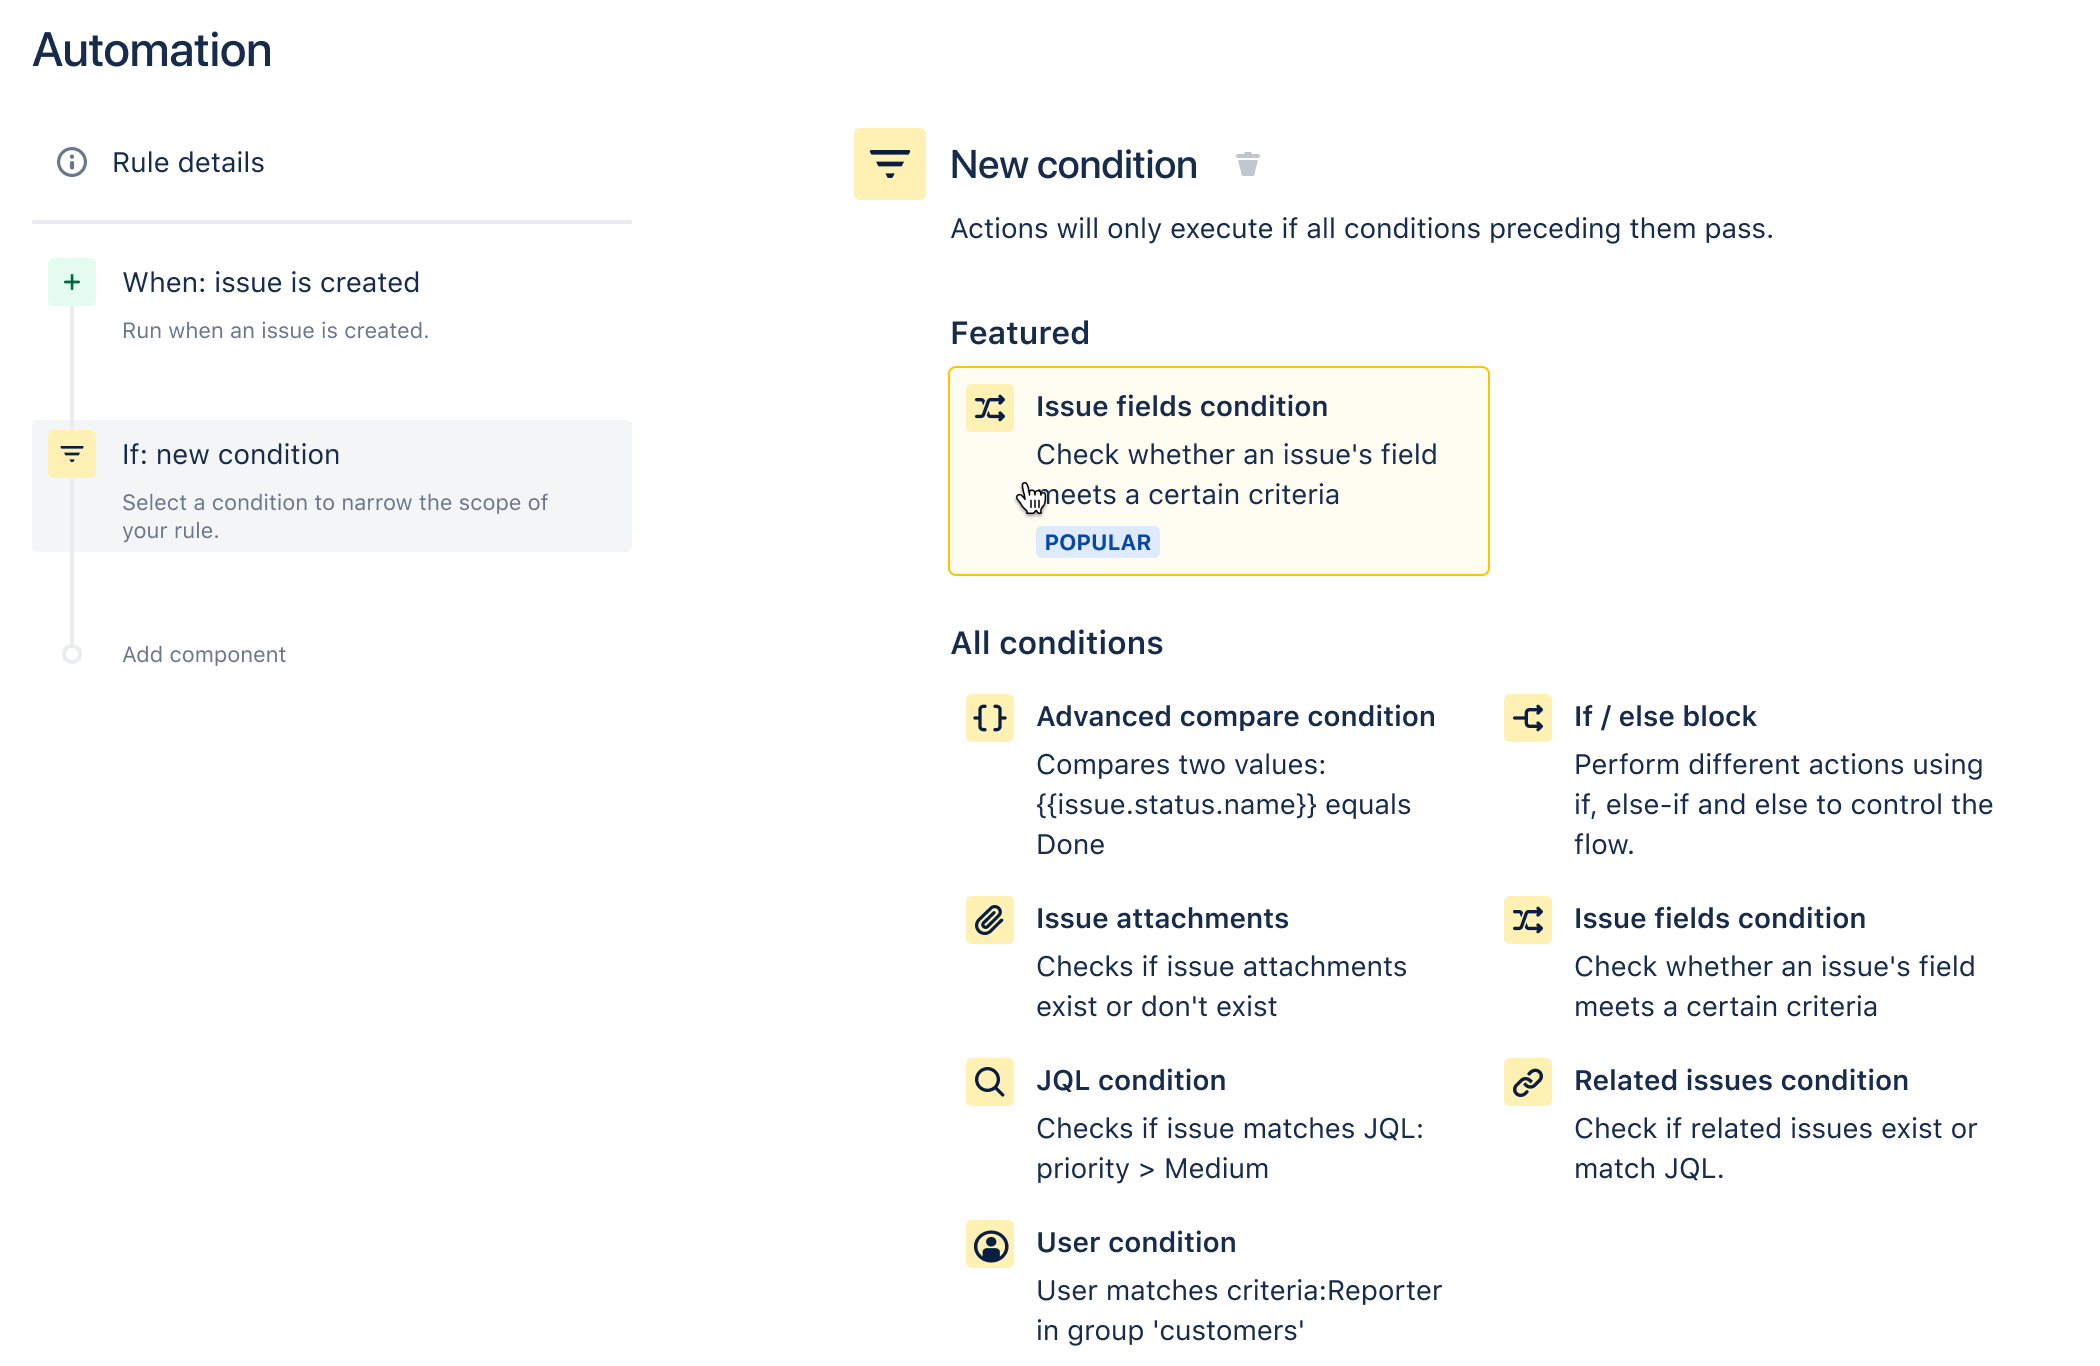 The list of conditions available when creating a rule.